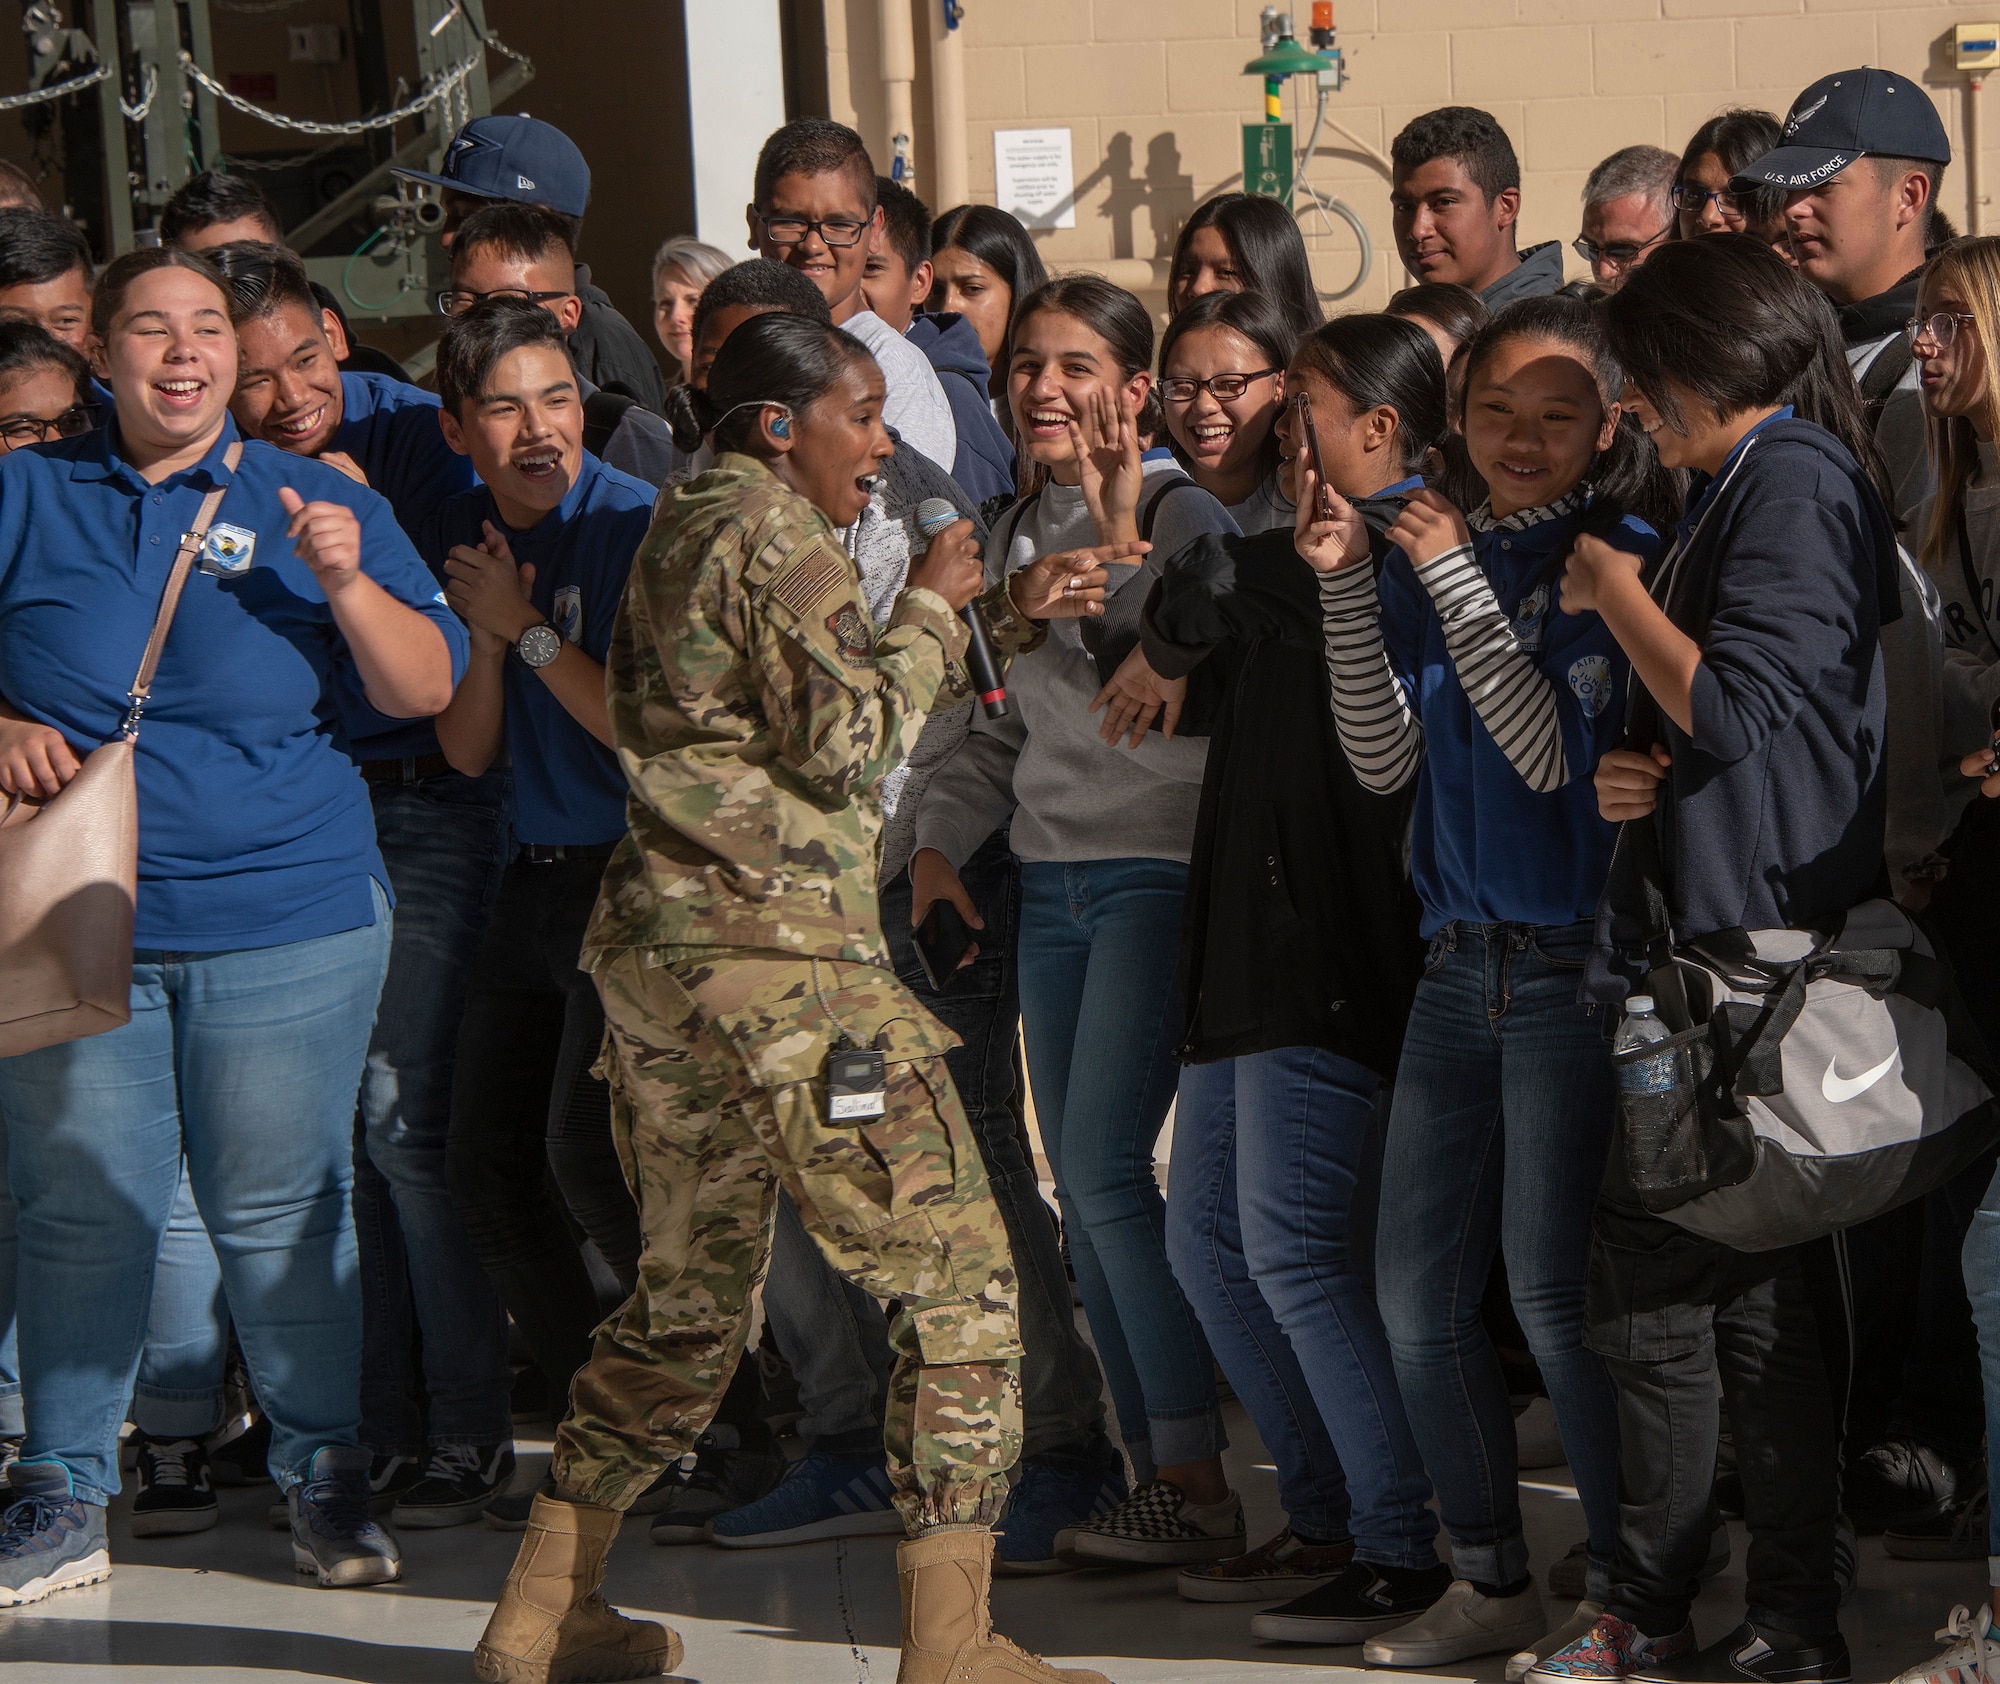 U.S. Air Force Senior Airman Salina Boodoosingh, a vocalist with the United States Air Force Band of the Golden West, gets the crowd moving, Nov. 8, 2018, Travis Air Force Base, California. Travis hosted Junior Reserve Officer Training Corps students from three high schools in Northern Calif. Students learned about various career fields in the U.S. Air Force, toured static aircraft, a dormitory, and had the opportunity to talk with personnel about military life. (U.S. Air Force photo by Heide Couch)